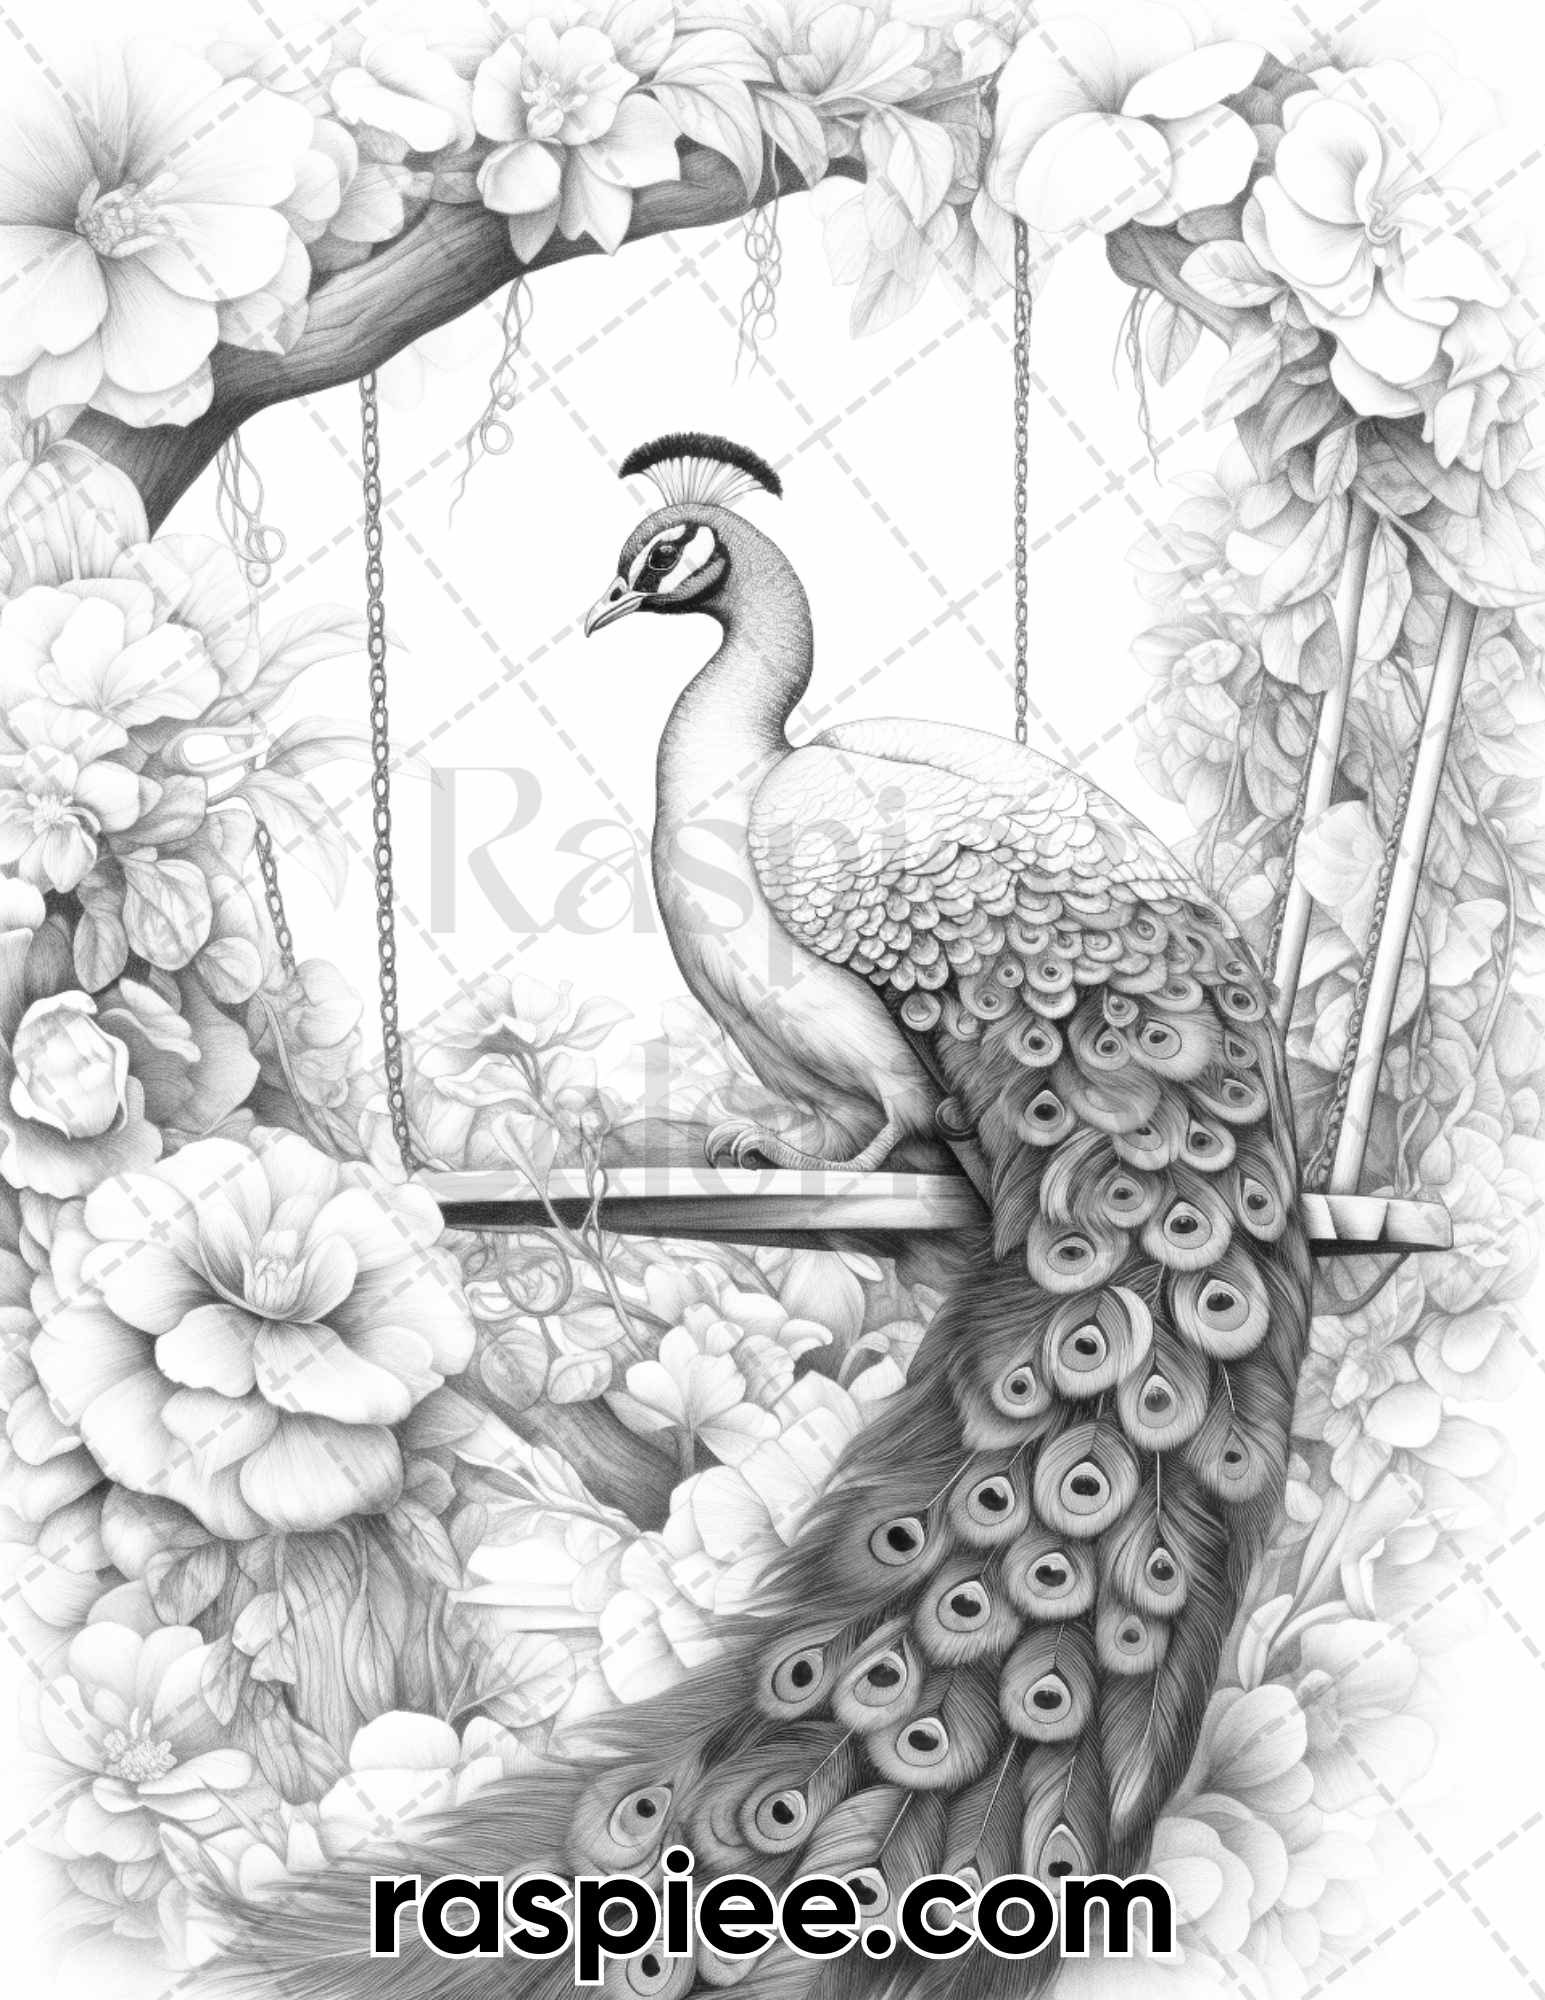 adult coloring pages, adult coloring sheets, adult coloring book pdf, adult coloring book printable, grayscale coloring pages, grayscale coloring books, spring coloring pages for adults, spring coloring book pdf, animal coloring pages for adults, animal coloring book pdf, peacock coloring pages